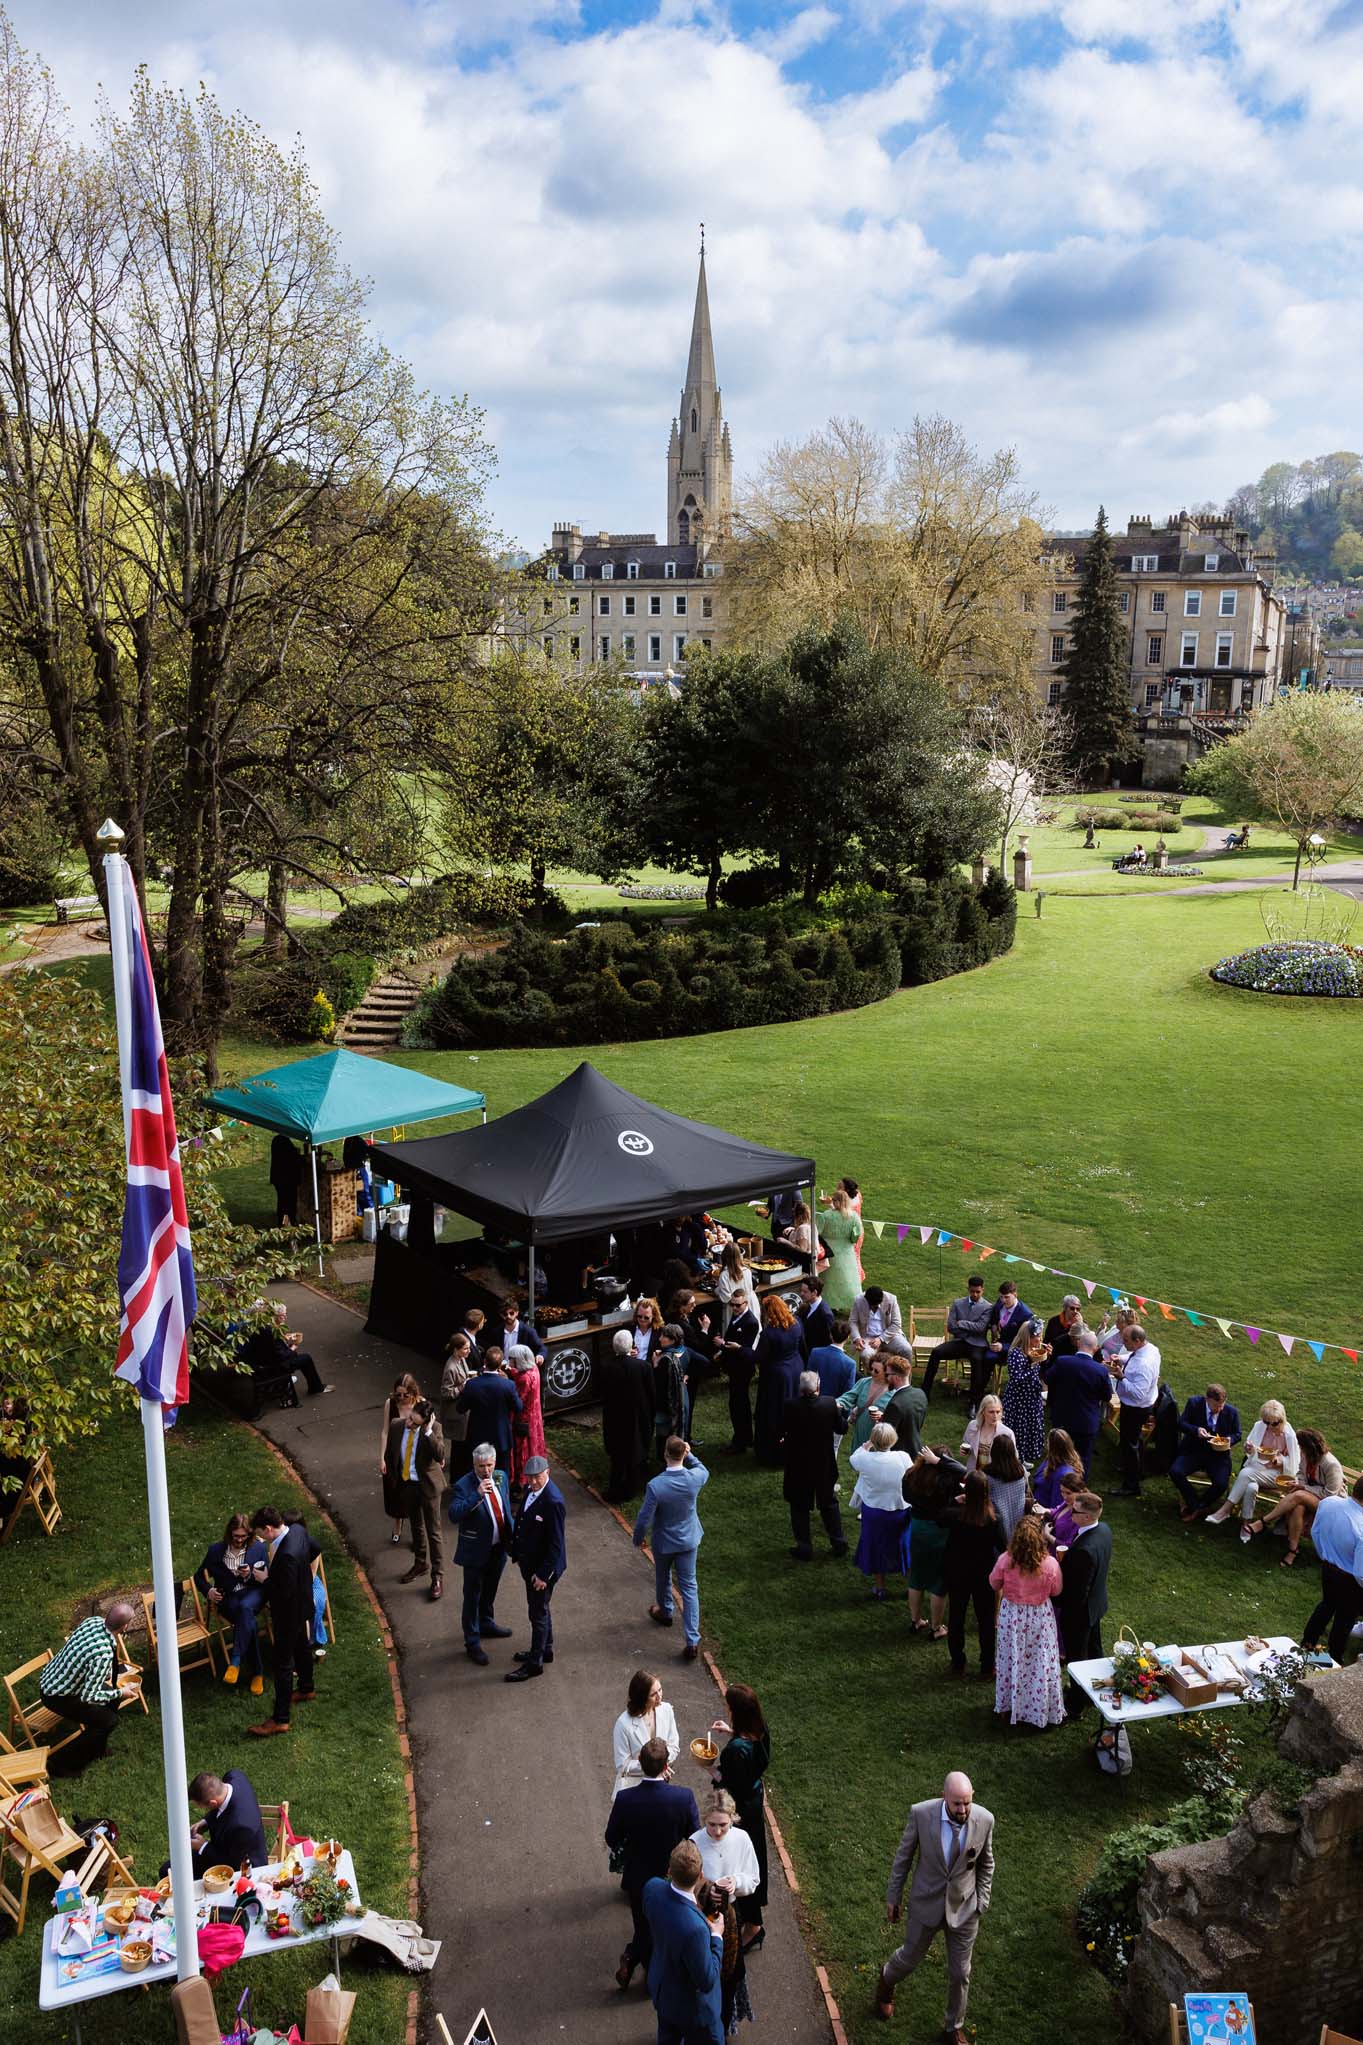 View of Wedding party from above, Parade Gardens